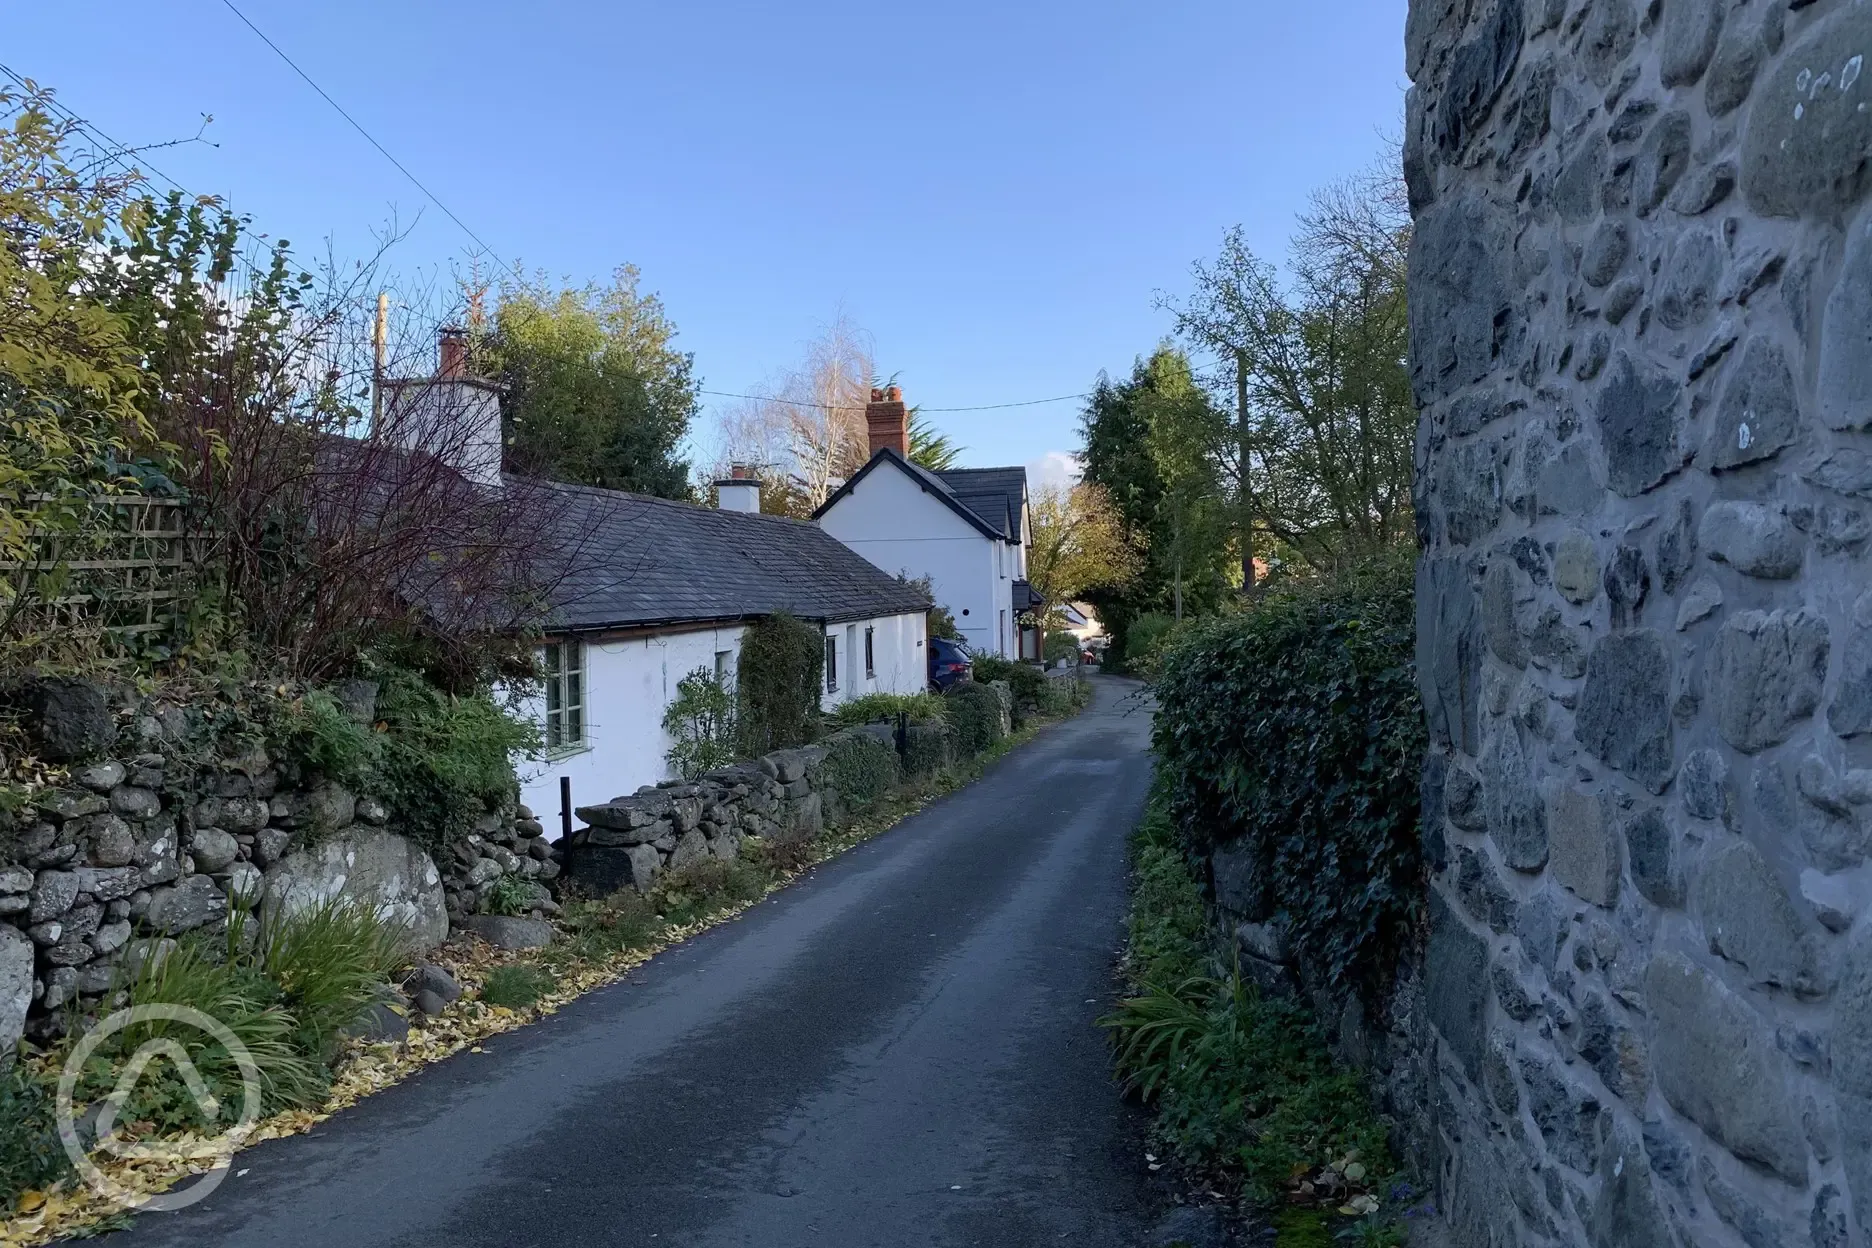 Rowen village with traditional Welsh cottages